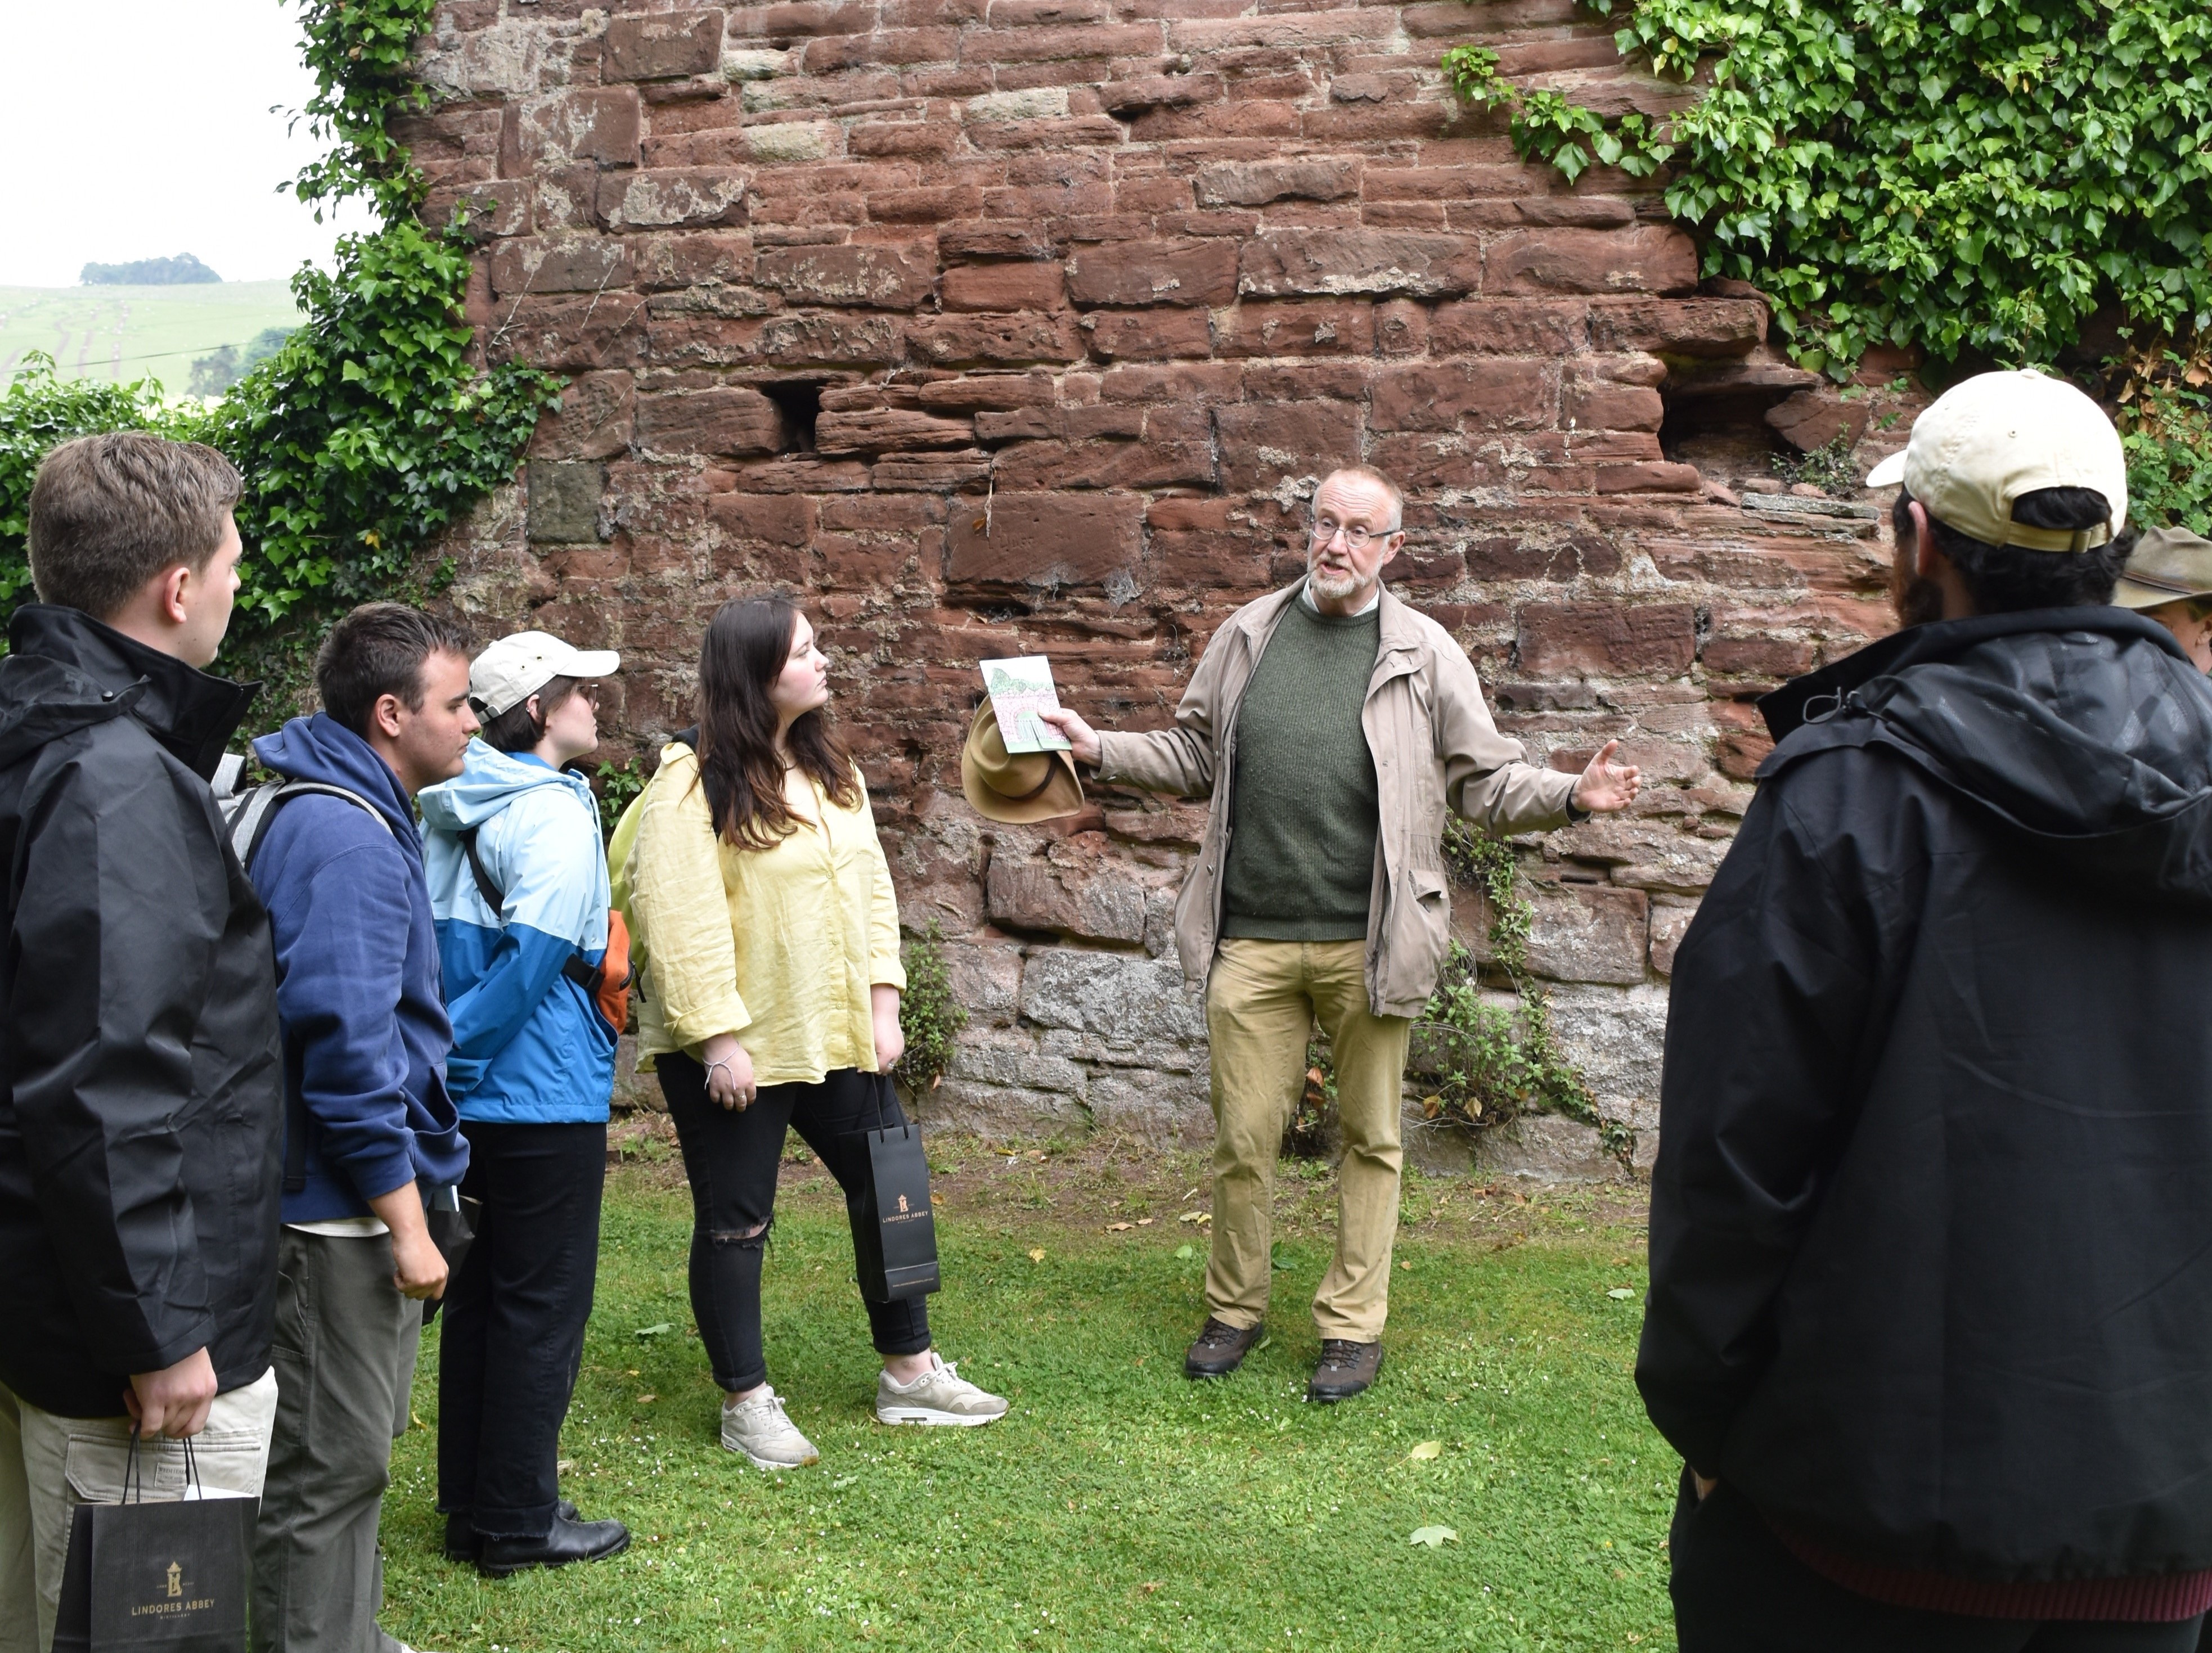 A lecturer speaks to group of students outoors, in front of the wall of a medieval structure.